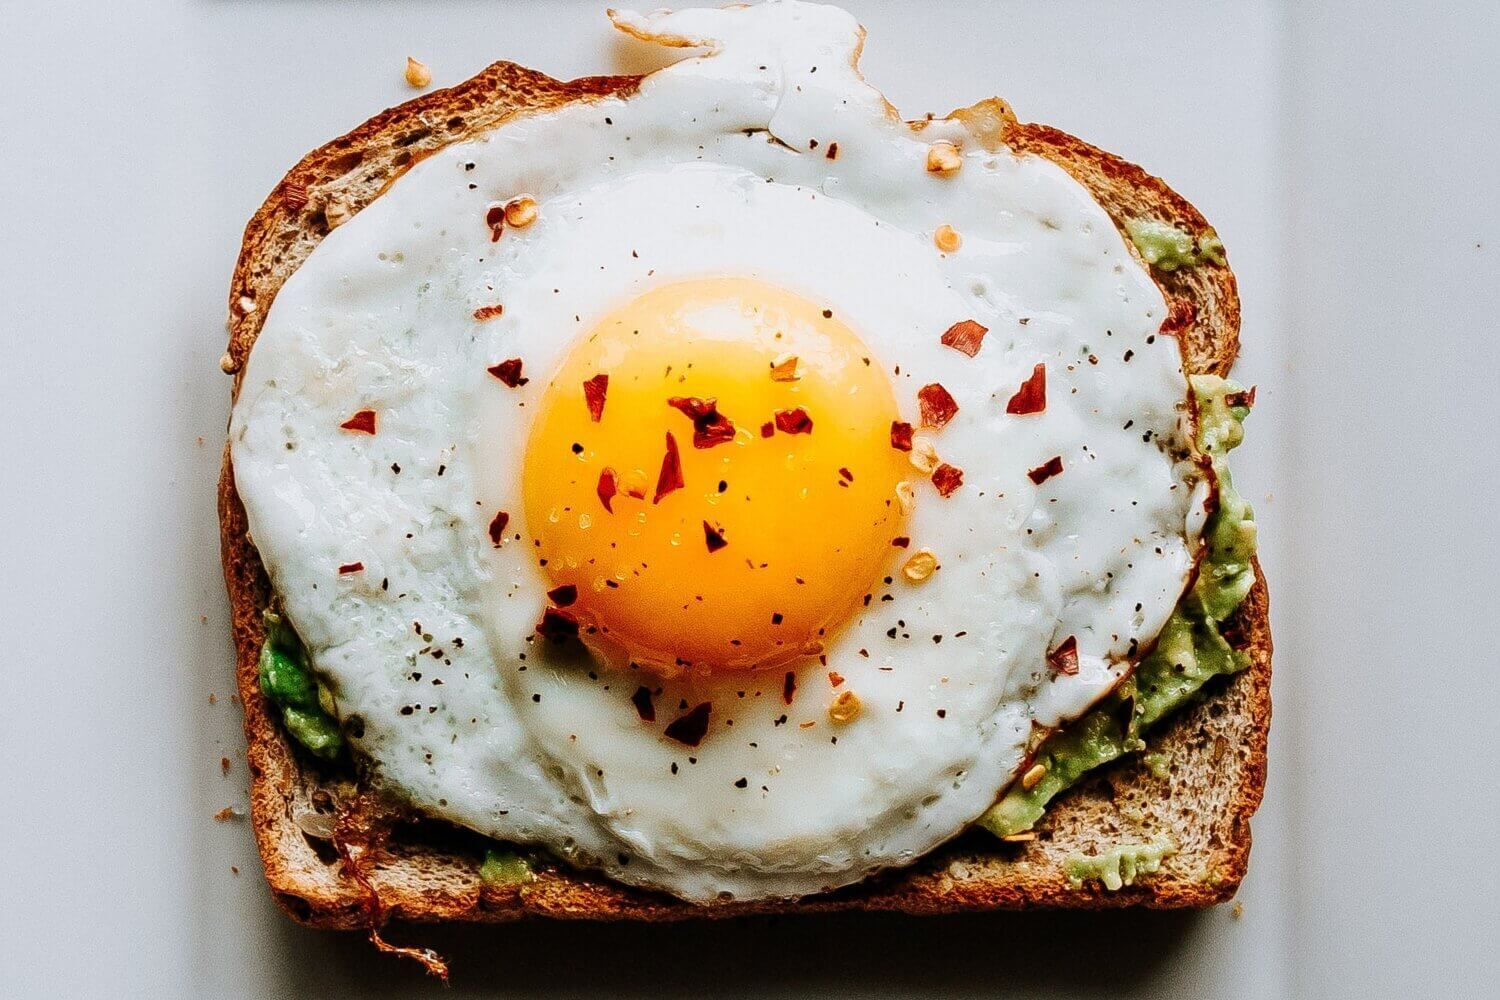 Eggs on a piece of toast with avocado and red pepper flakes.